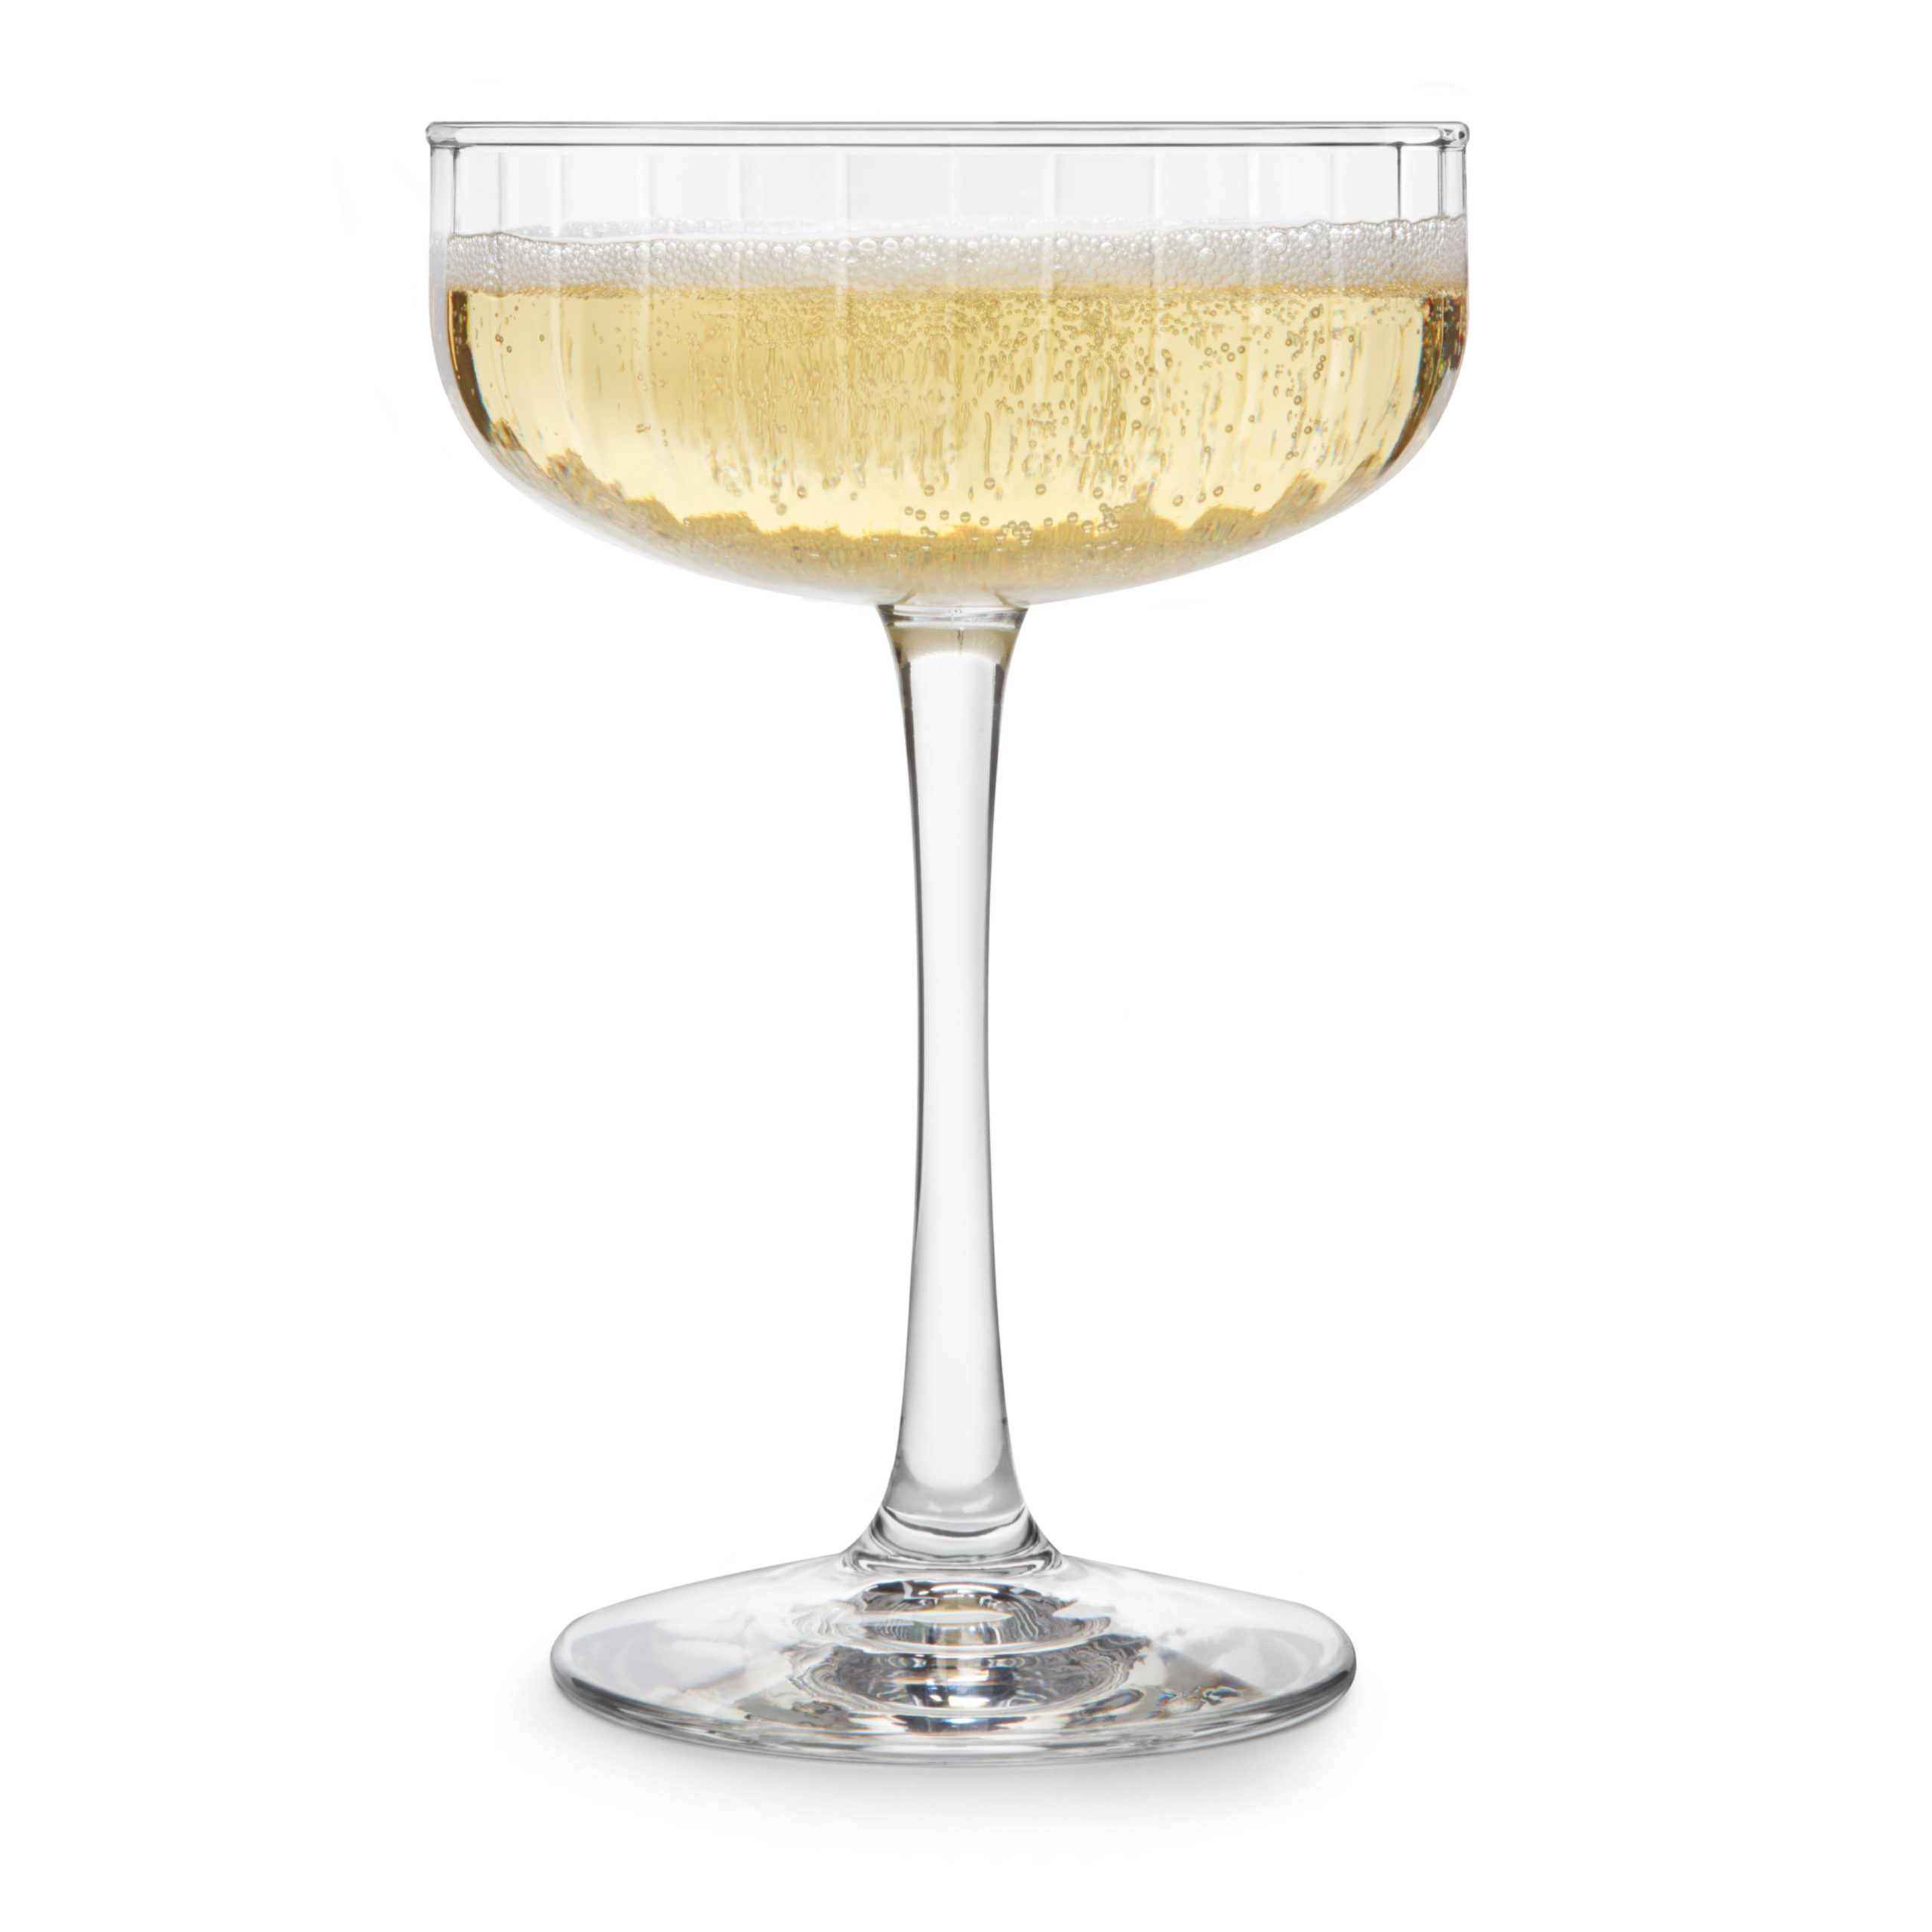 Libbey Paneled Coupe Champagne Glass